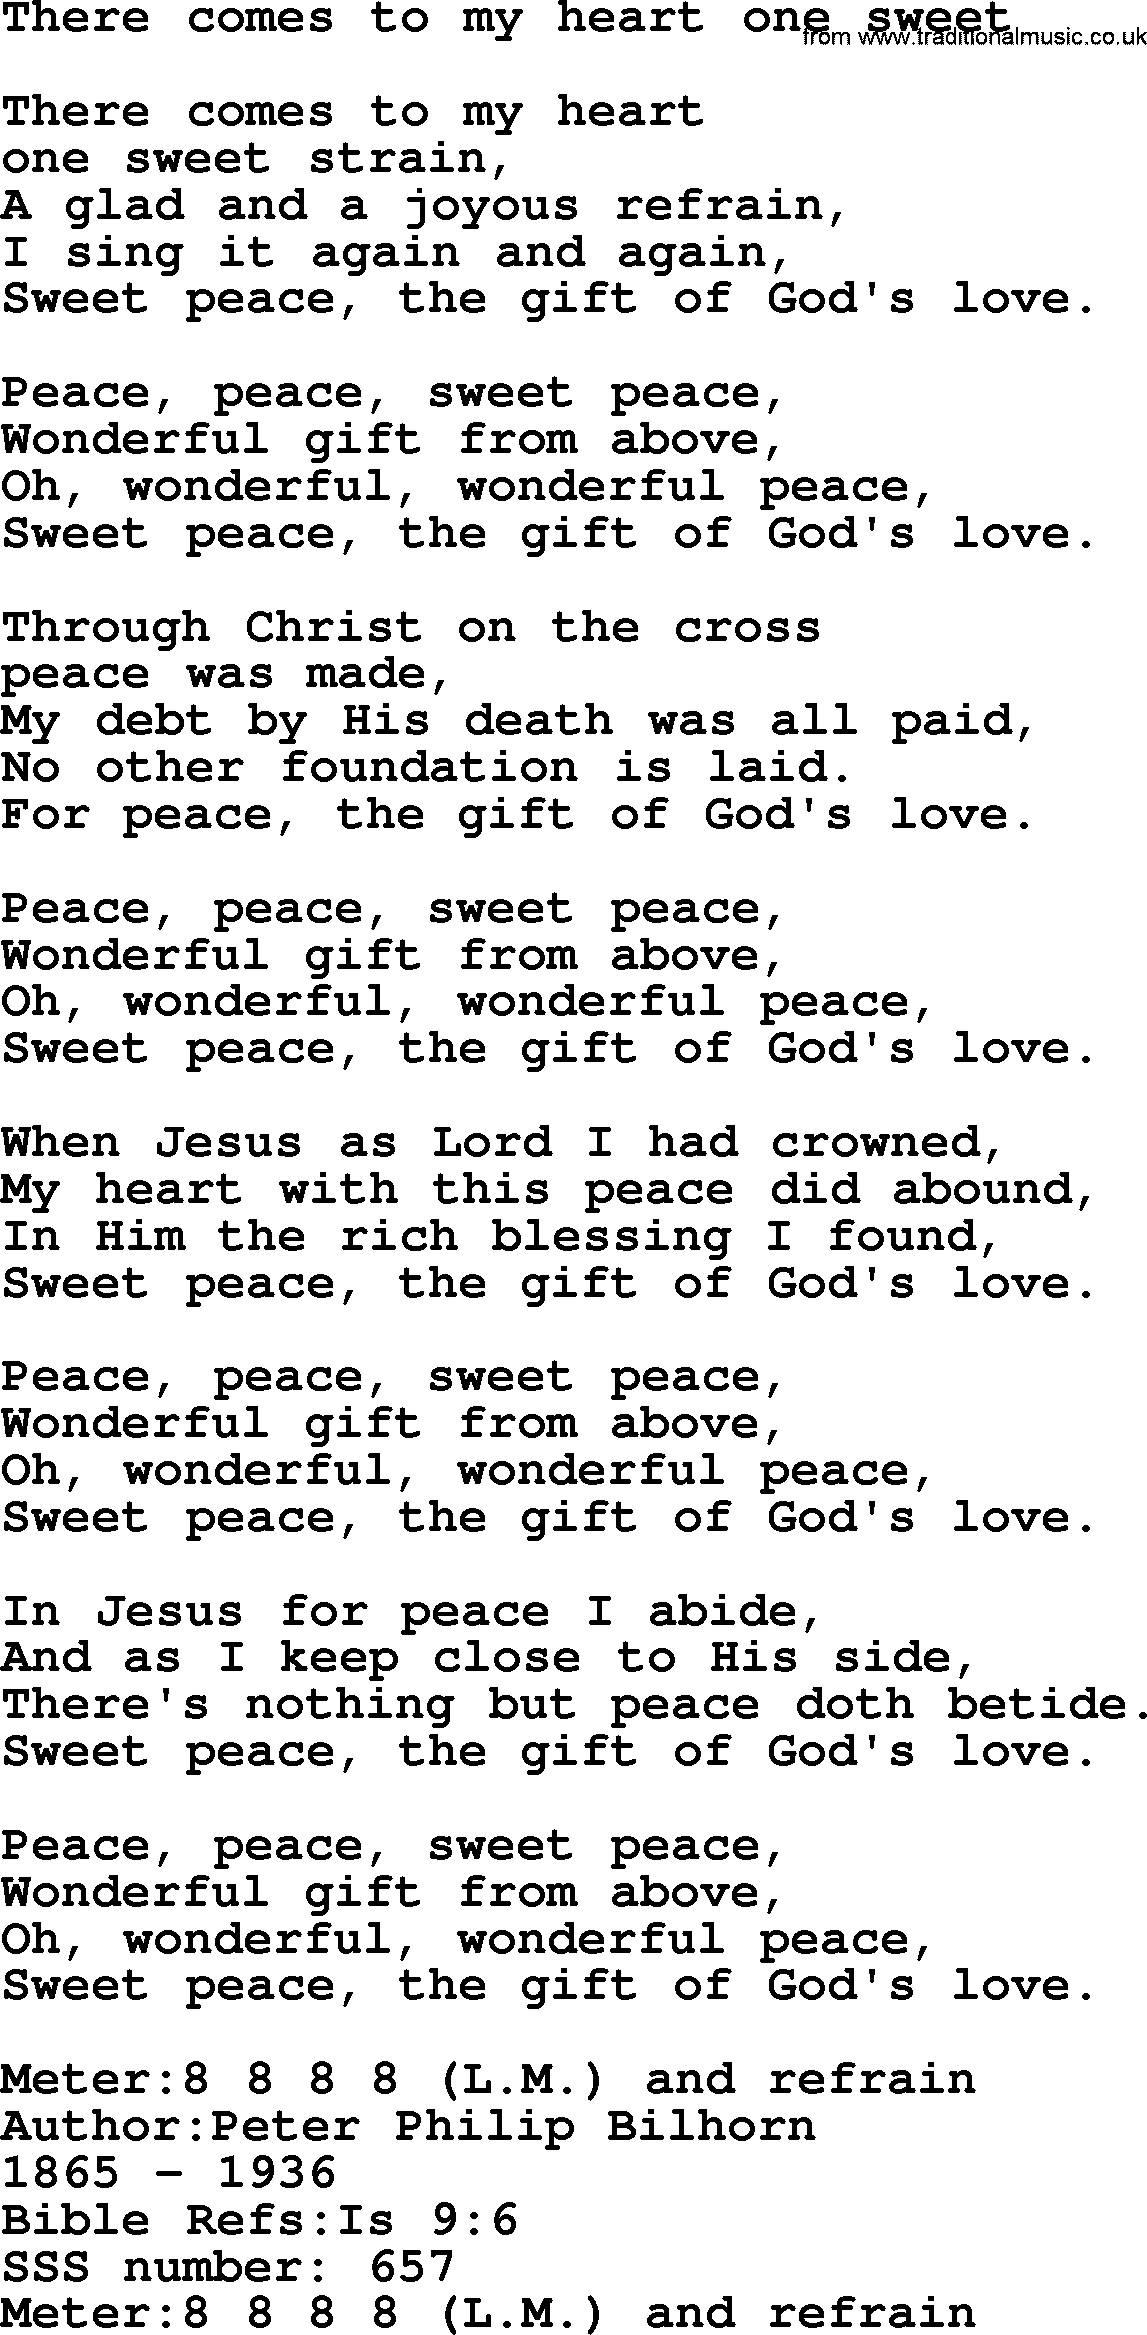 Sacred Songs and Solos complete, 1200 Hymns, title: There Comes To My Heart One Sweet, lyrics and PDF